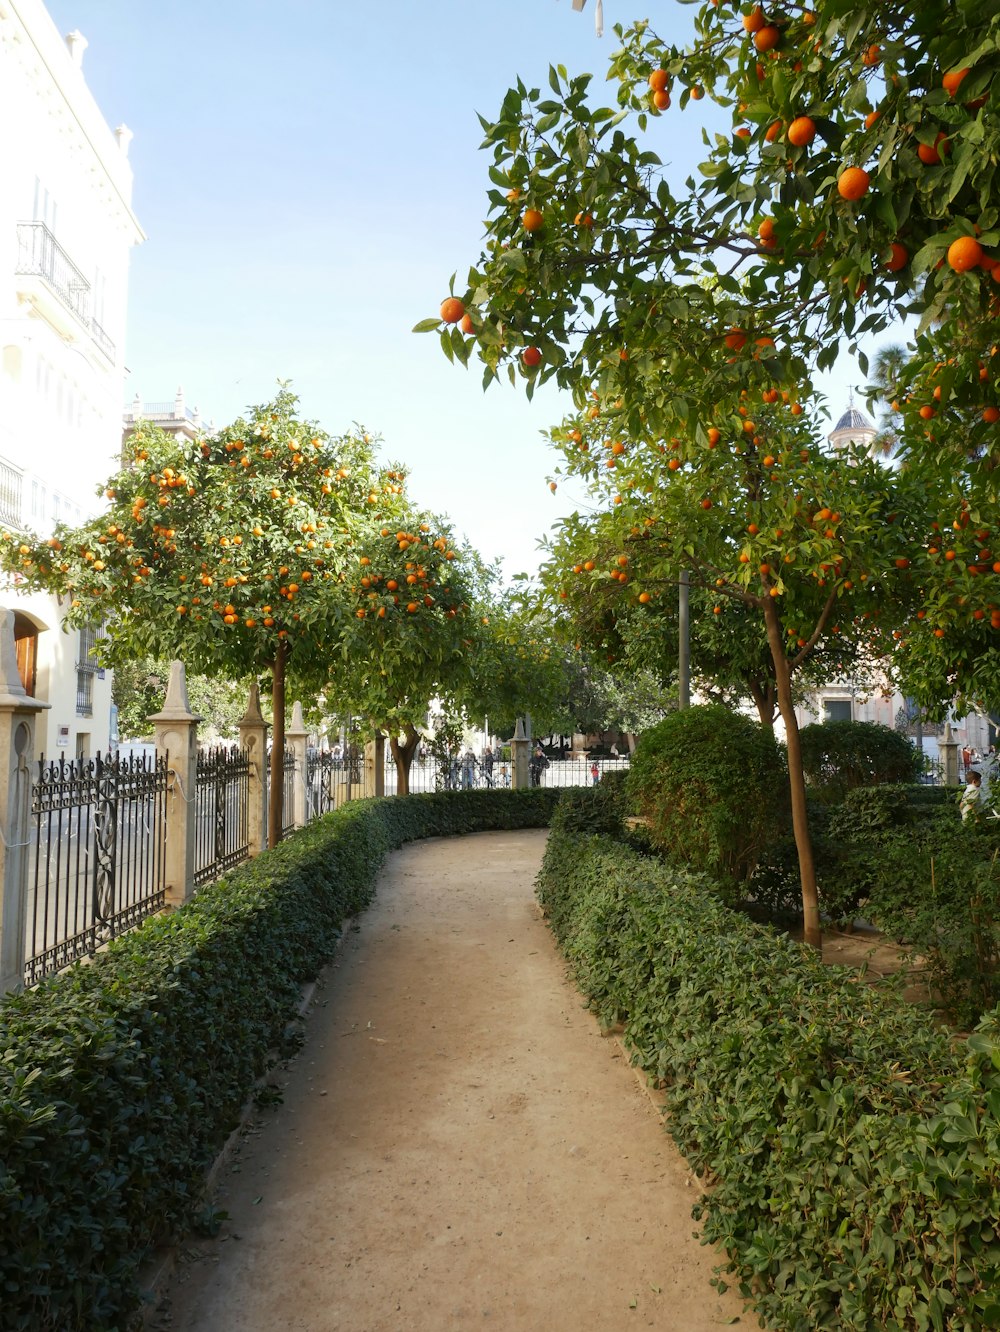 a path lined with orange trees next to a fence